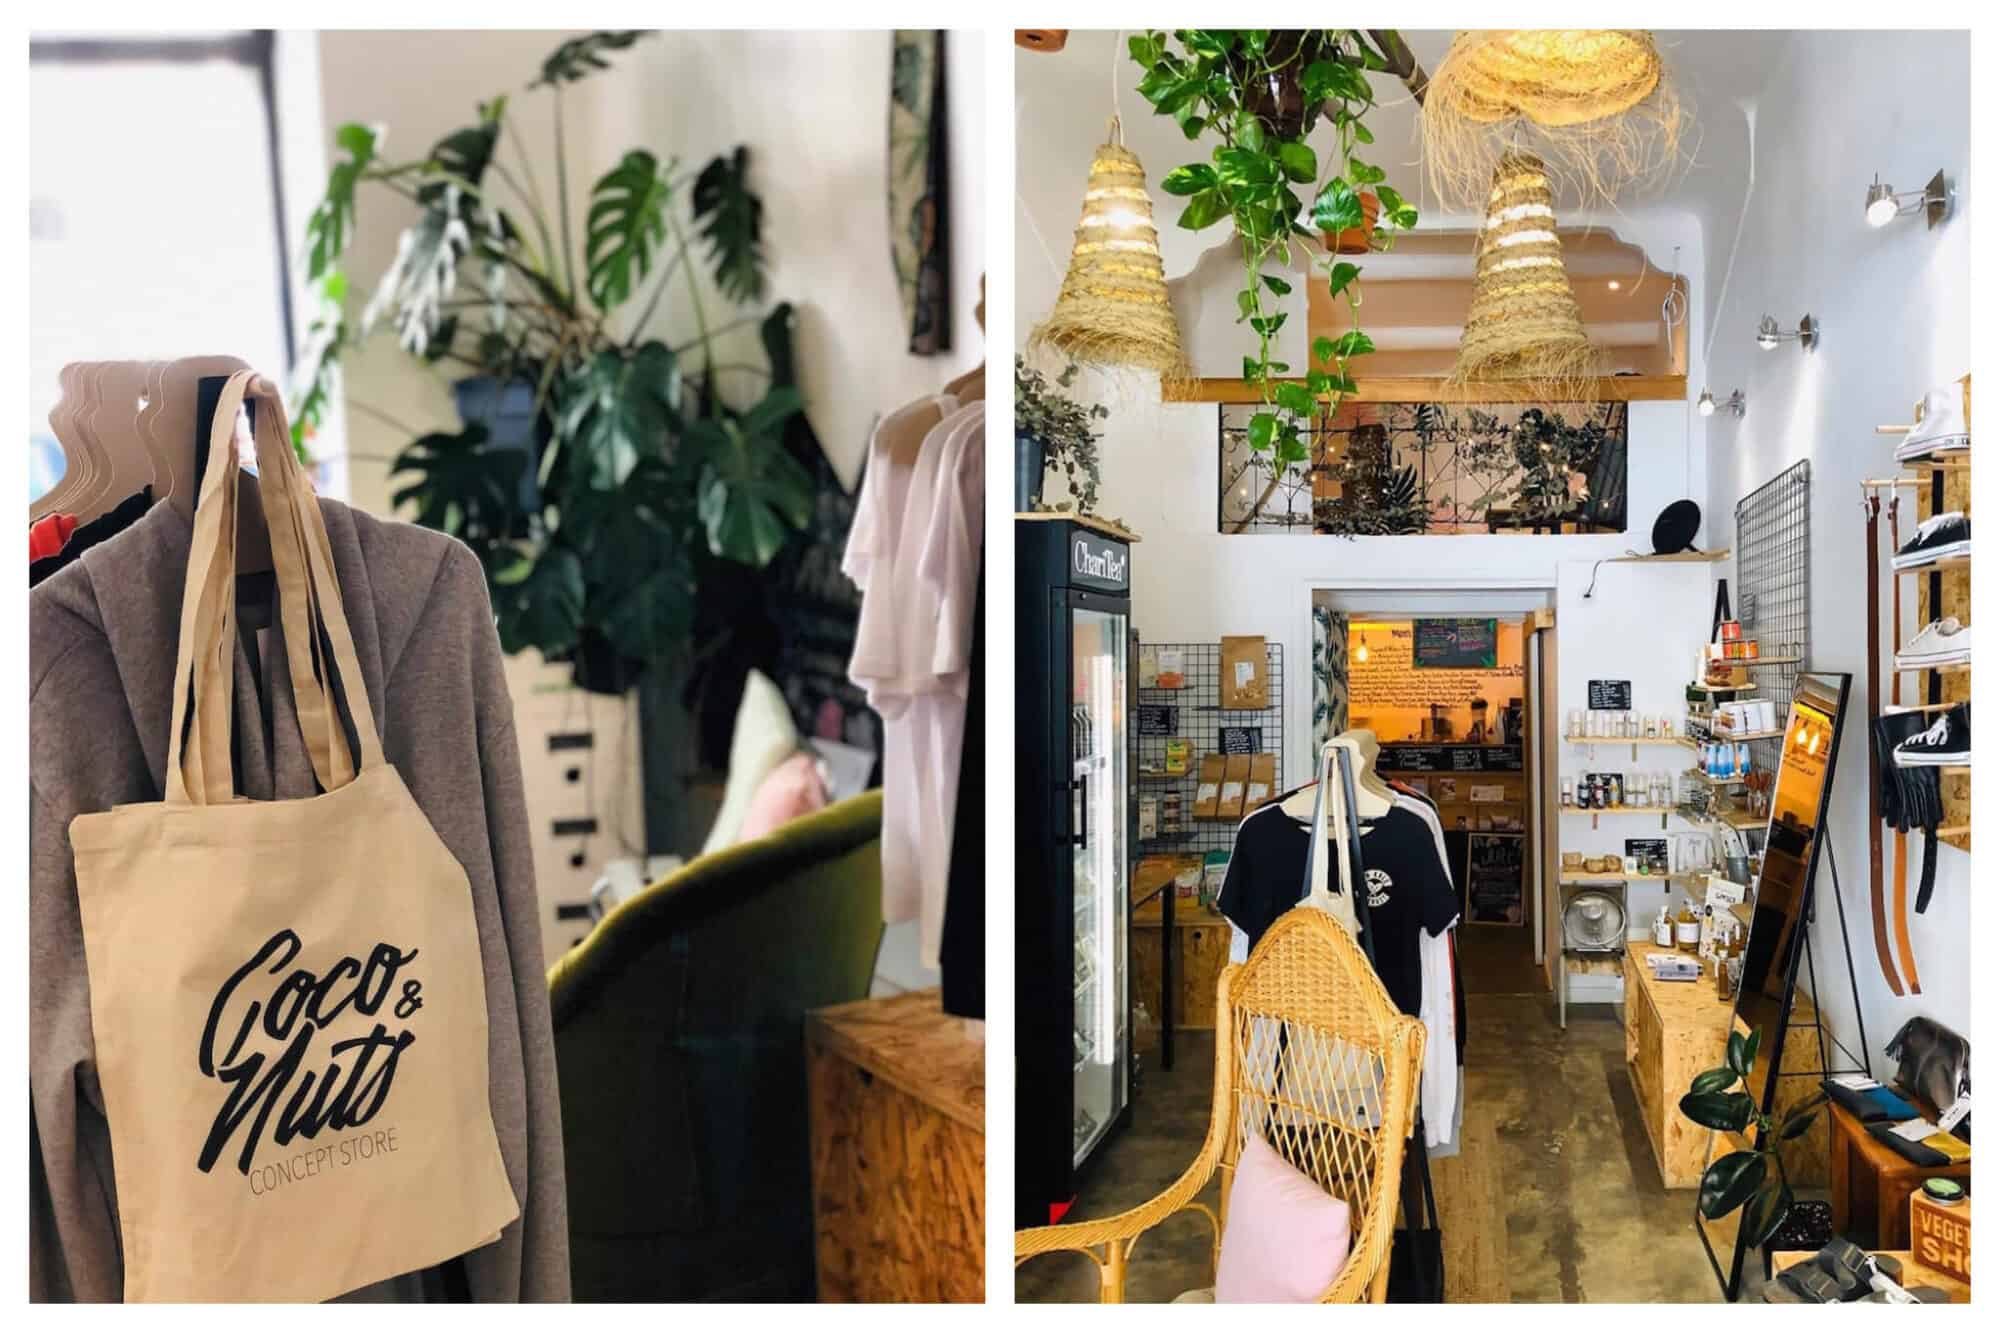 Left: a close up view of merchandise in Coco and Nuts Marseille shop, including a tote bag, t-shirts and a plant.
Right: Another view of the shop's interior but from further away.